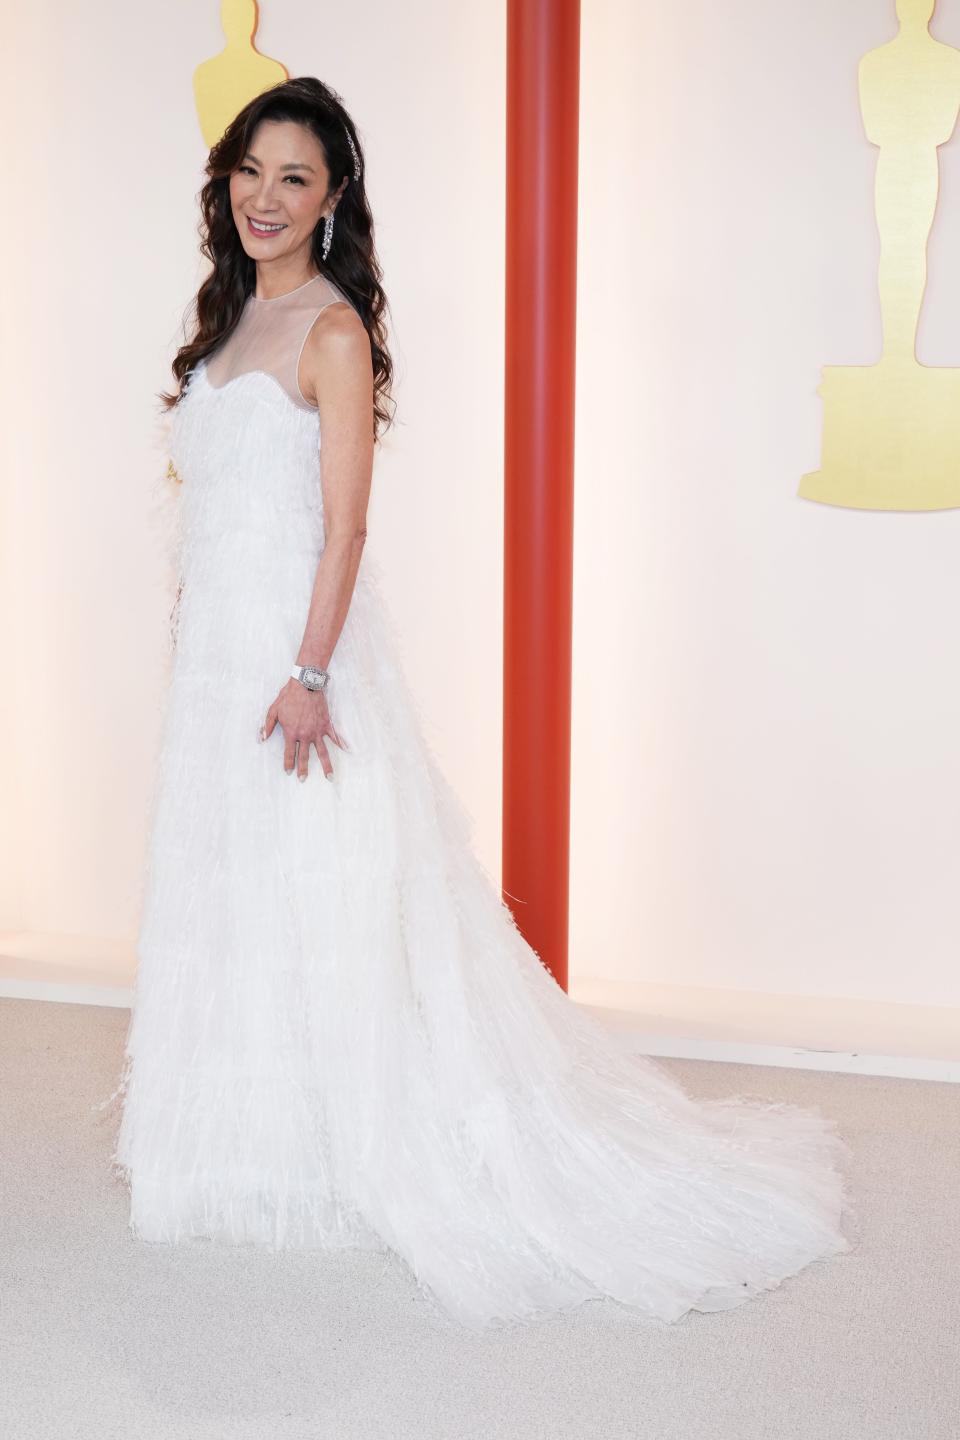 Michelle Yeoh attends the 95th Annual Academy Awards on March 12, 2023 in Hollywood, California.